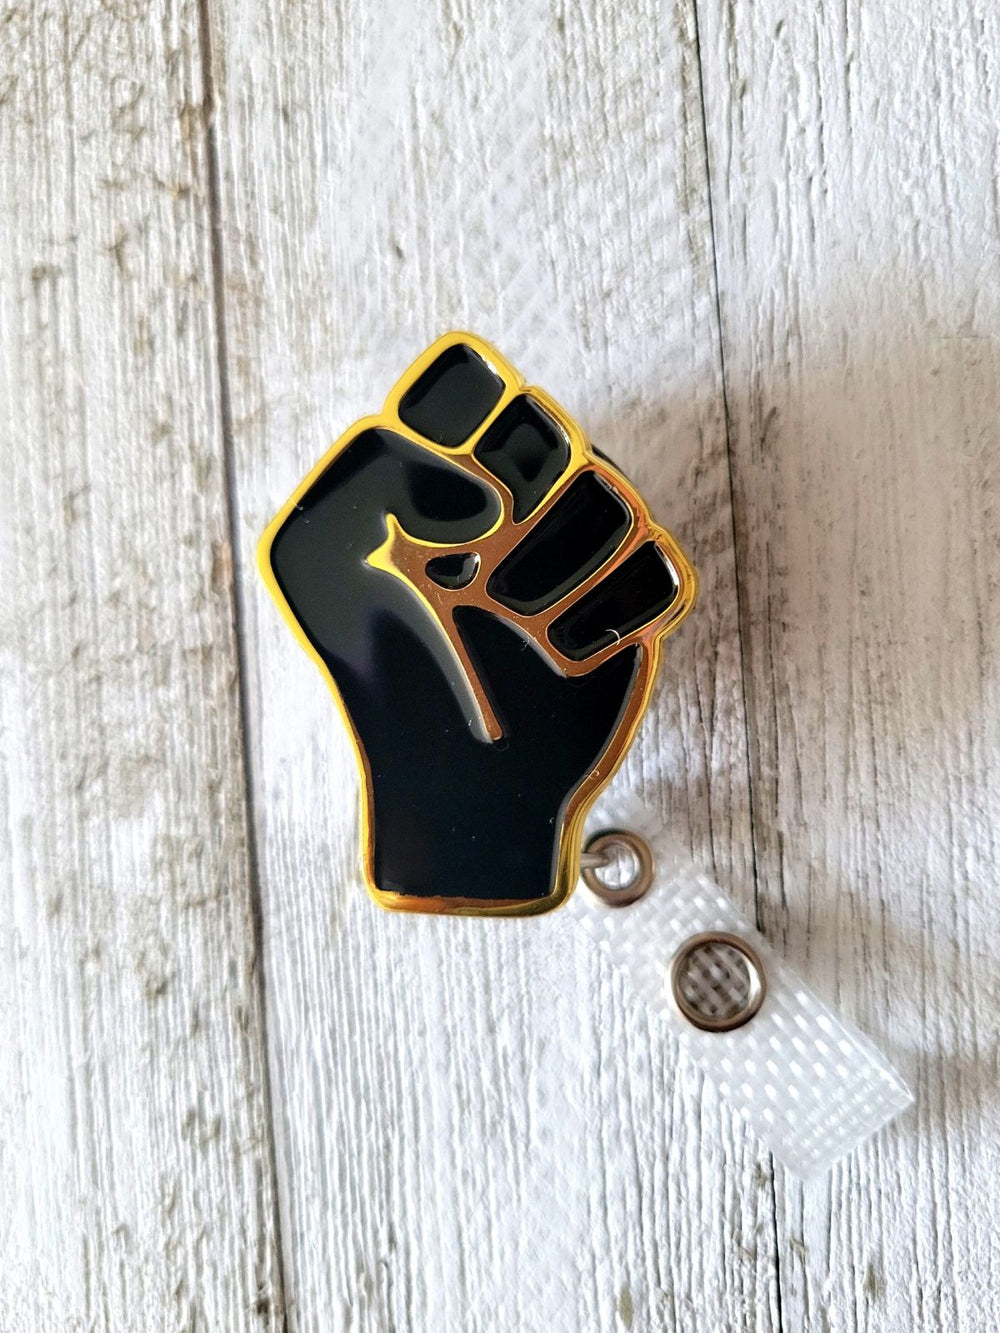 Black and gold power fist